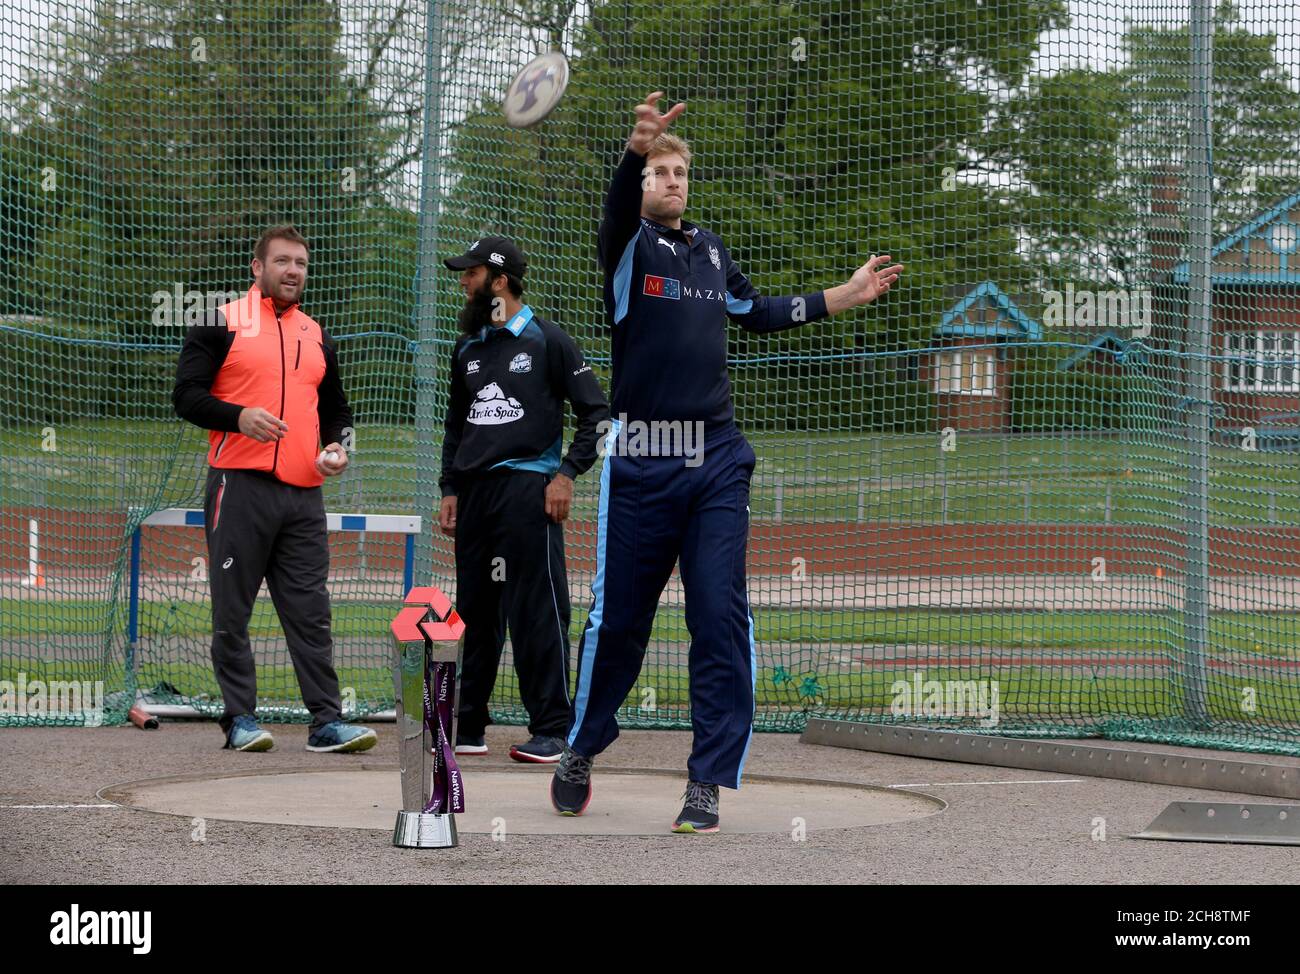 Joe Root (right) throws a discus while being watched by Dan Greaves (left) and Moeen Ali during the T20 Blast Launch at Loughborough University, Louoghborough. PRESS ASSOCIATION Photo. Picture date: Friday May 13, 2016. See PA story CRICKET T20. Photo credit should read: Simon Cooper/PA Wire. RESTRICTIONS: Editorial use only. No commercial use without prior written consent of the ECB. Still image use only. No moving images to emulate broadcast. No removing or obscuring of sponsor logos. Call +44 (0)1158 447447 for further information. Stock Photo